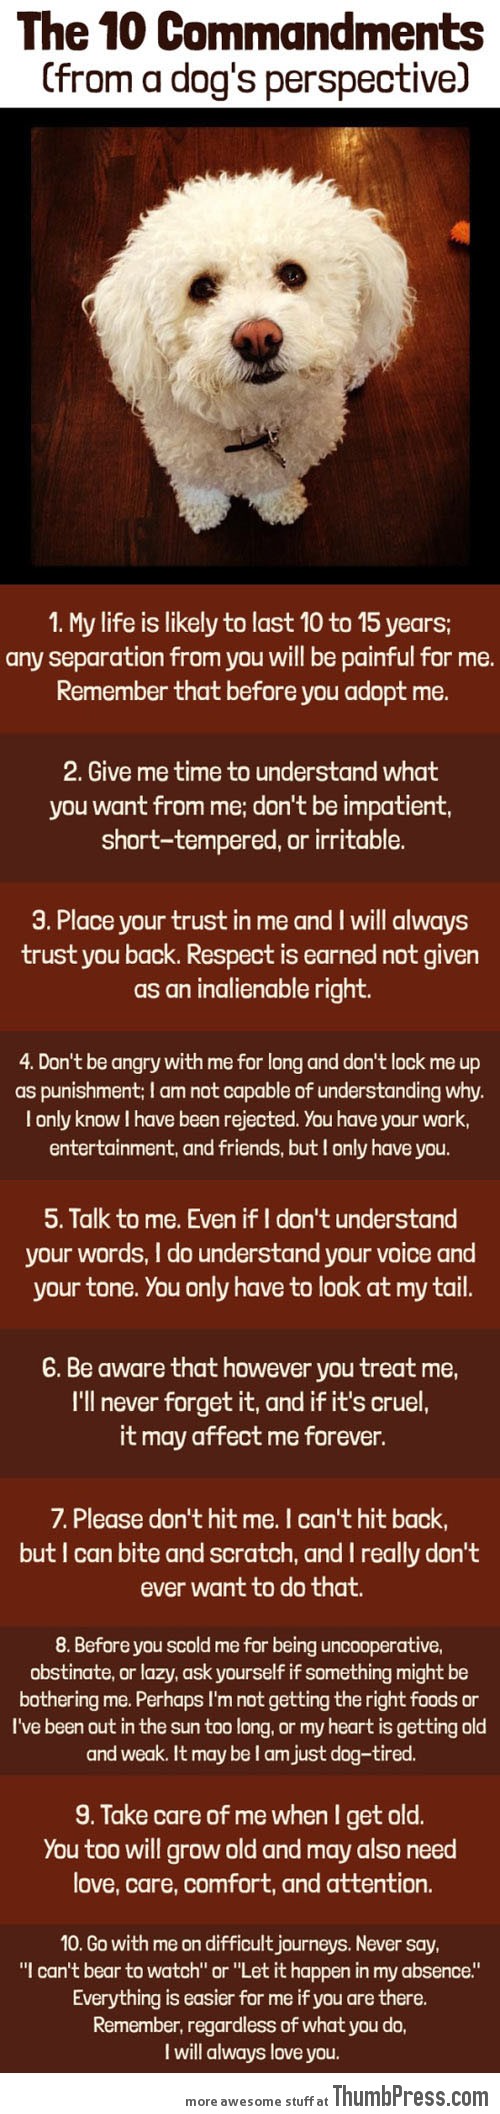 Commandments from a dog’s perspective…